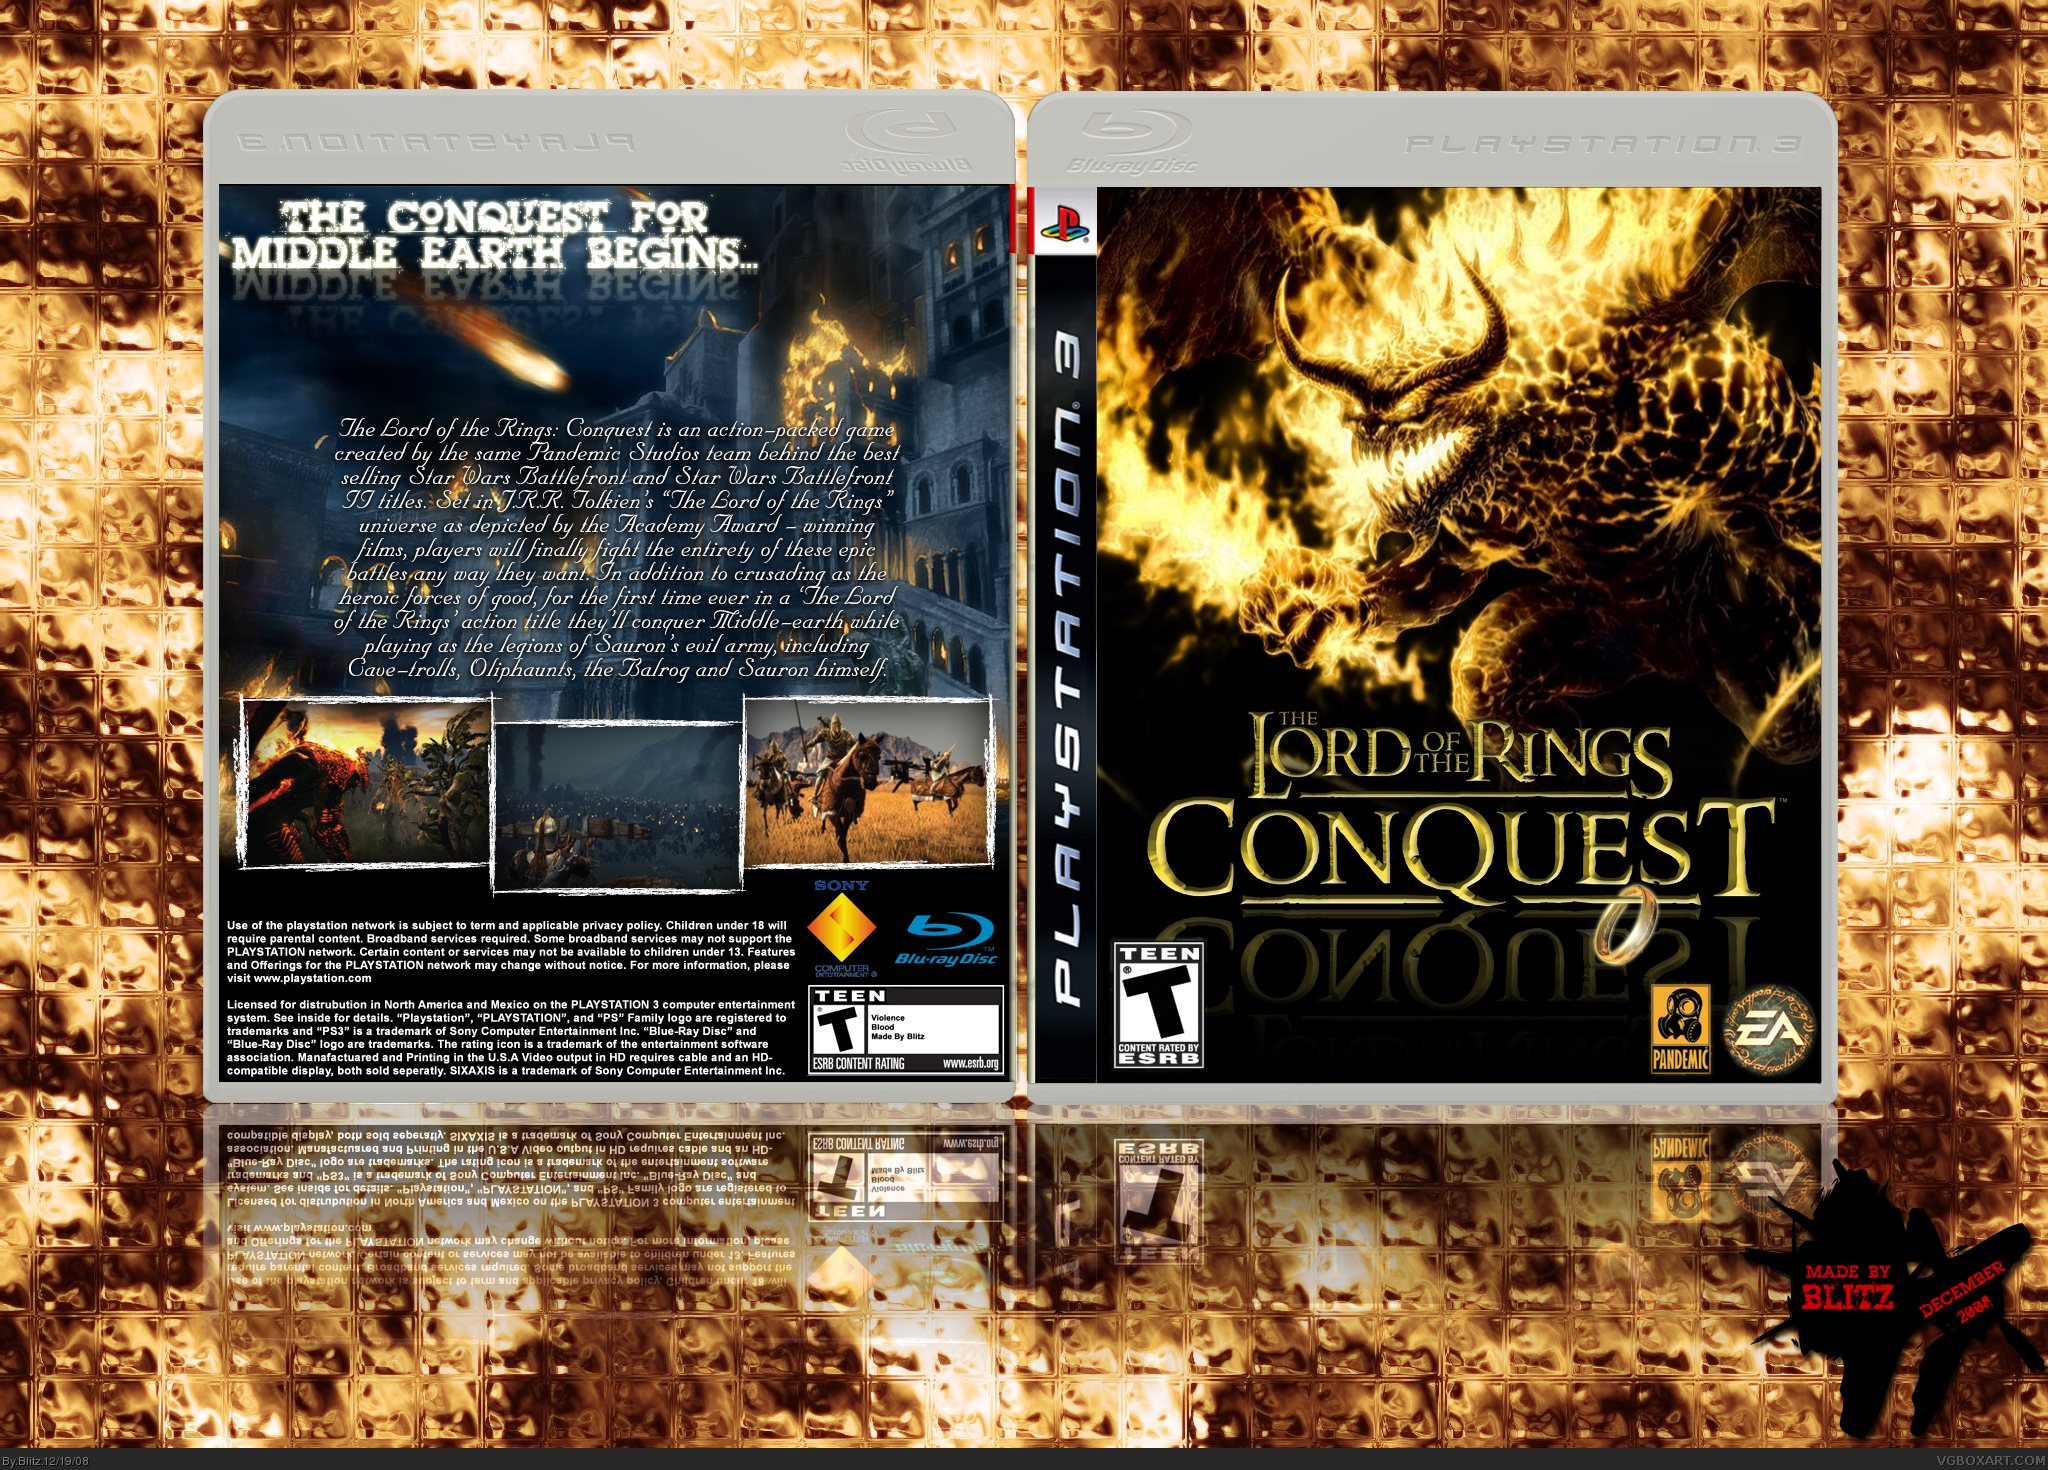 Lord Of The Rings: Conquest box cover